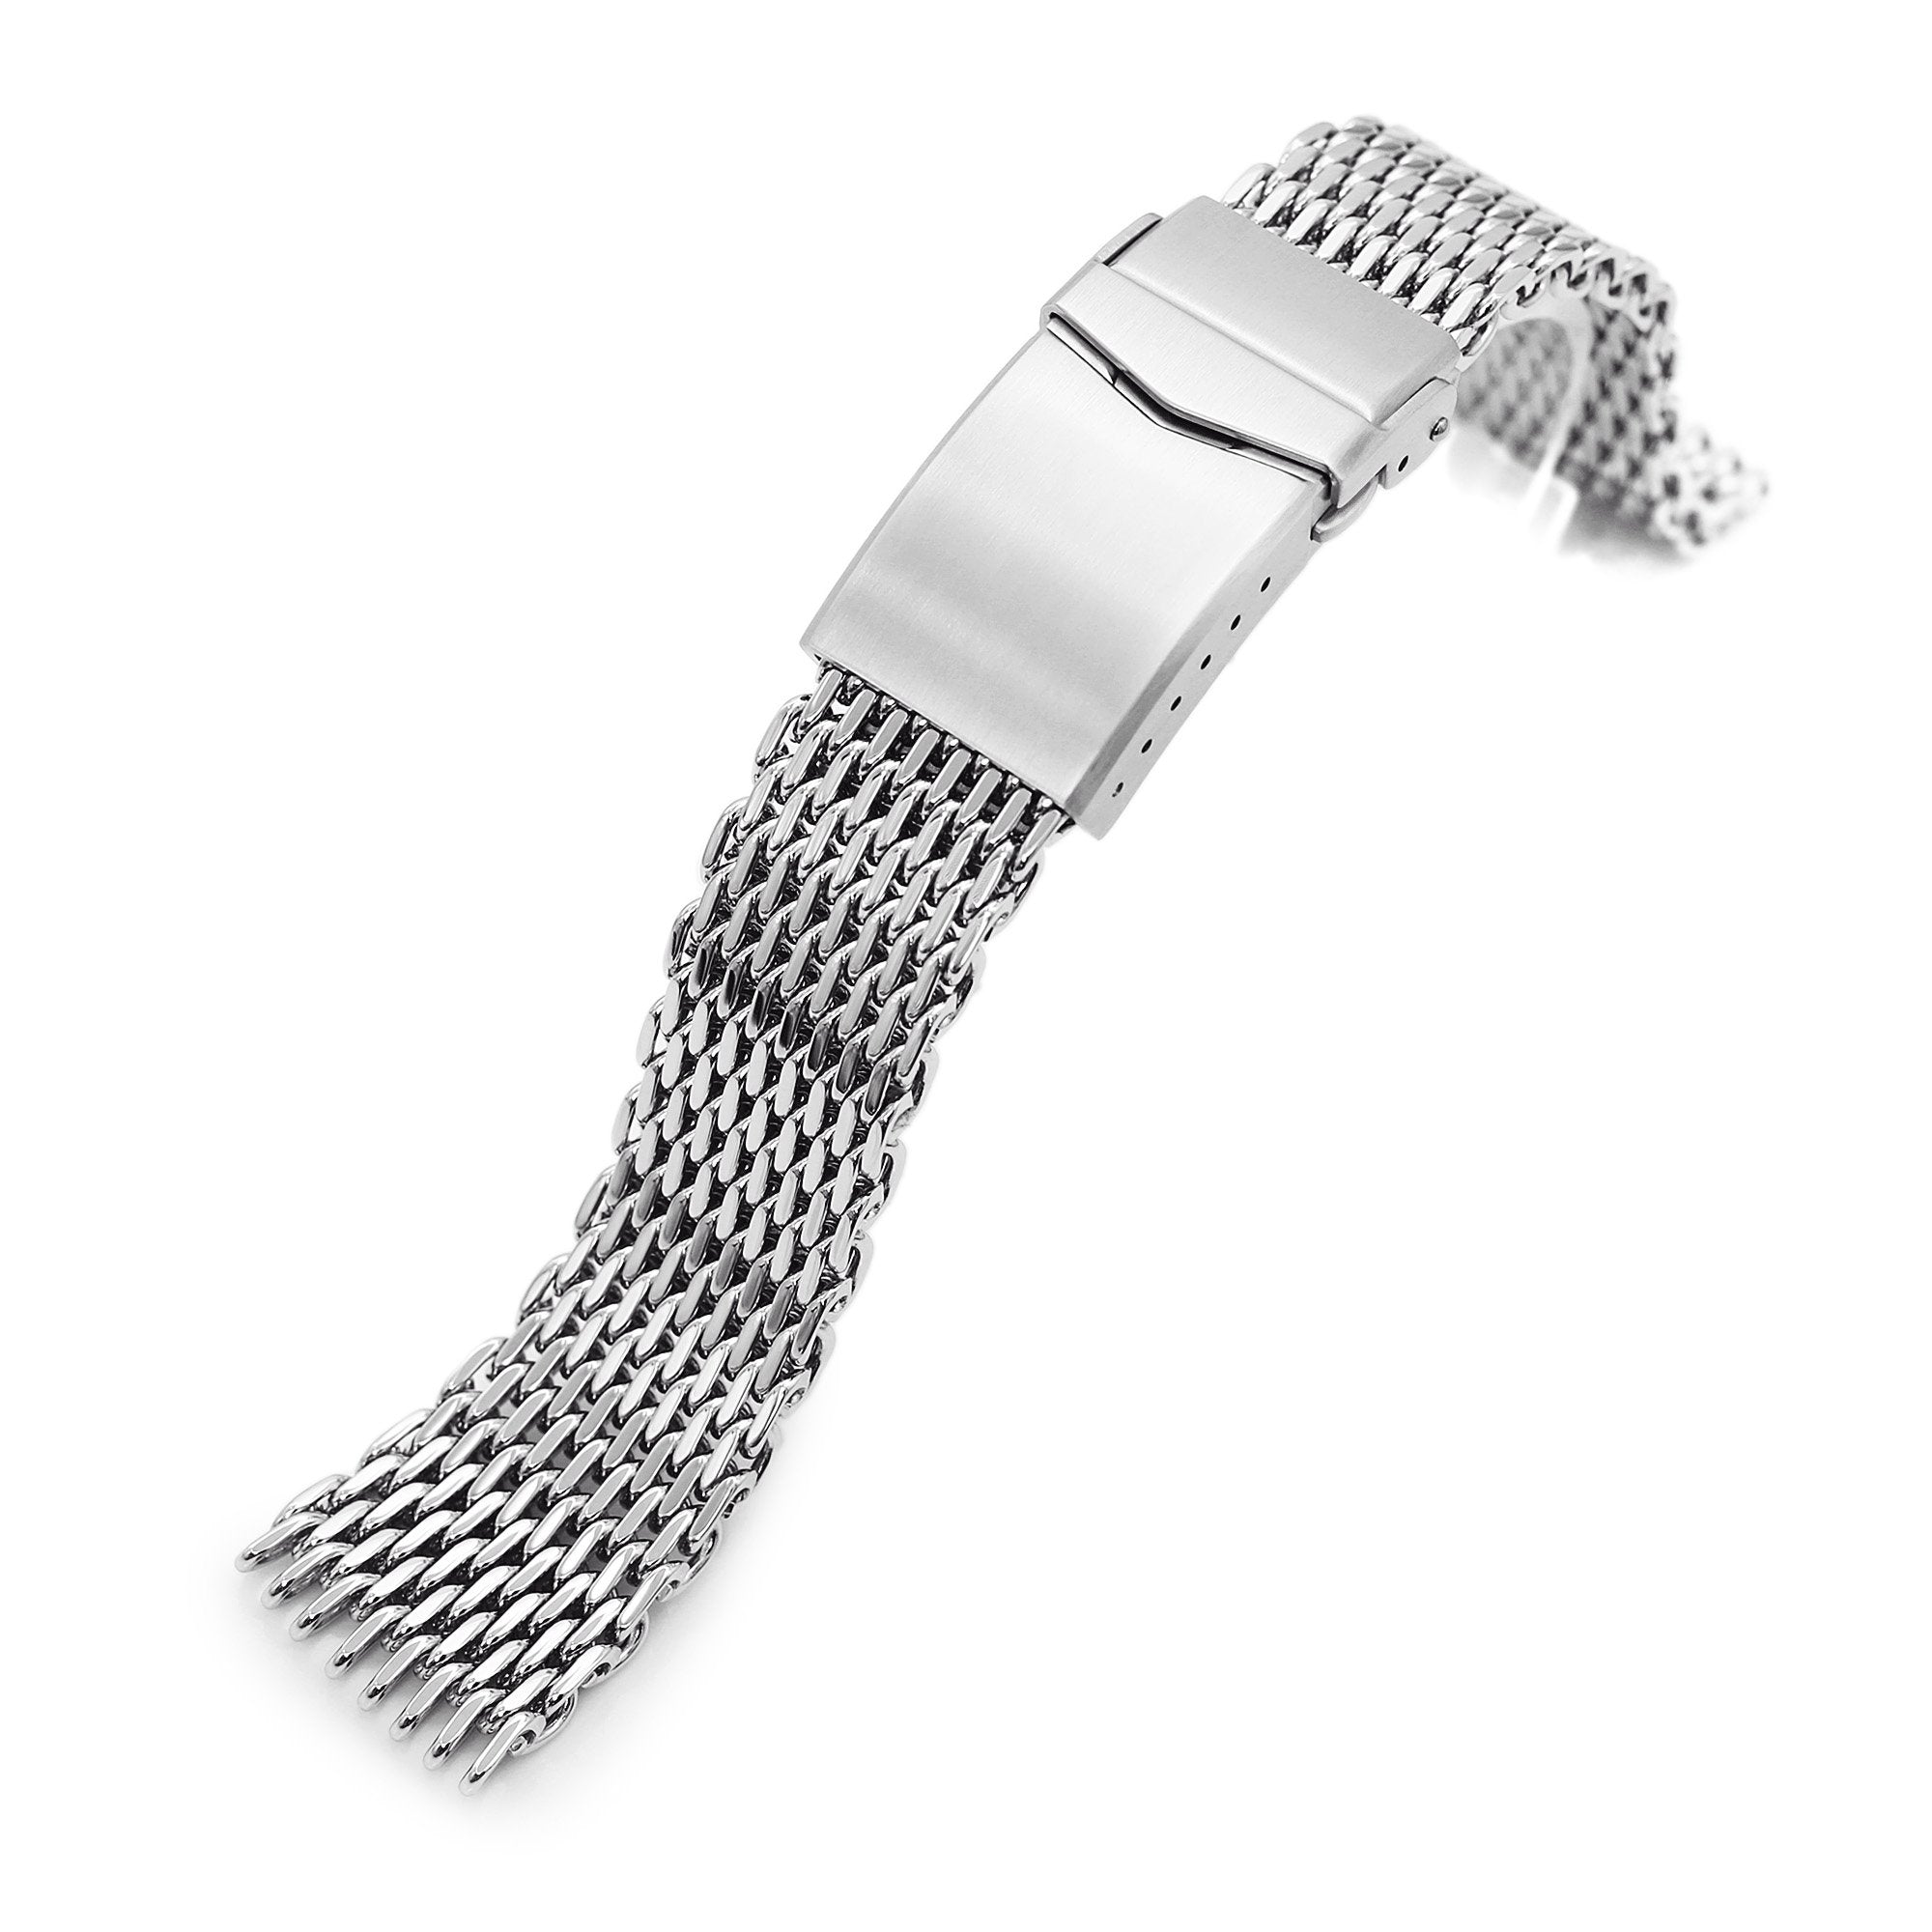 20mm Tapered "SHARK" Mesh Band Stainless Steel Watch Bracelet V-Clasp Polished Strapcode Watch Bands